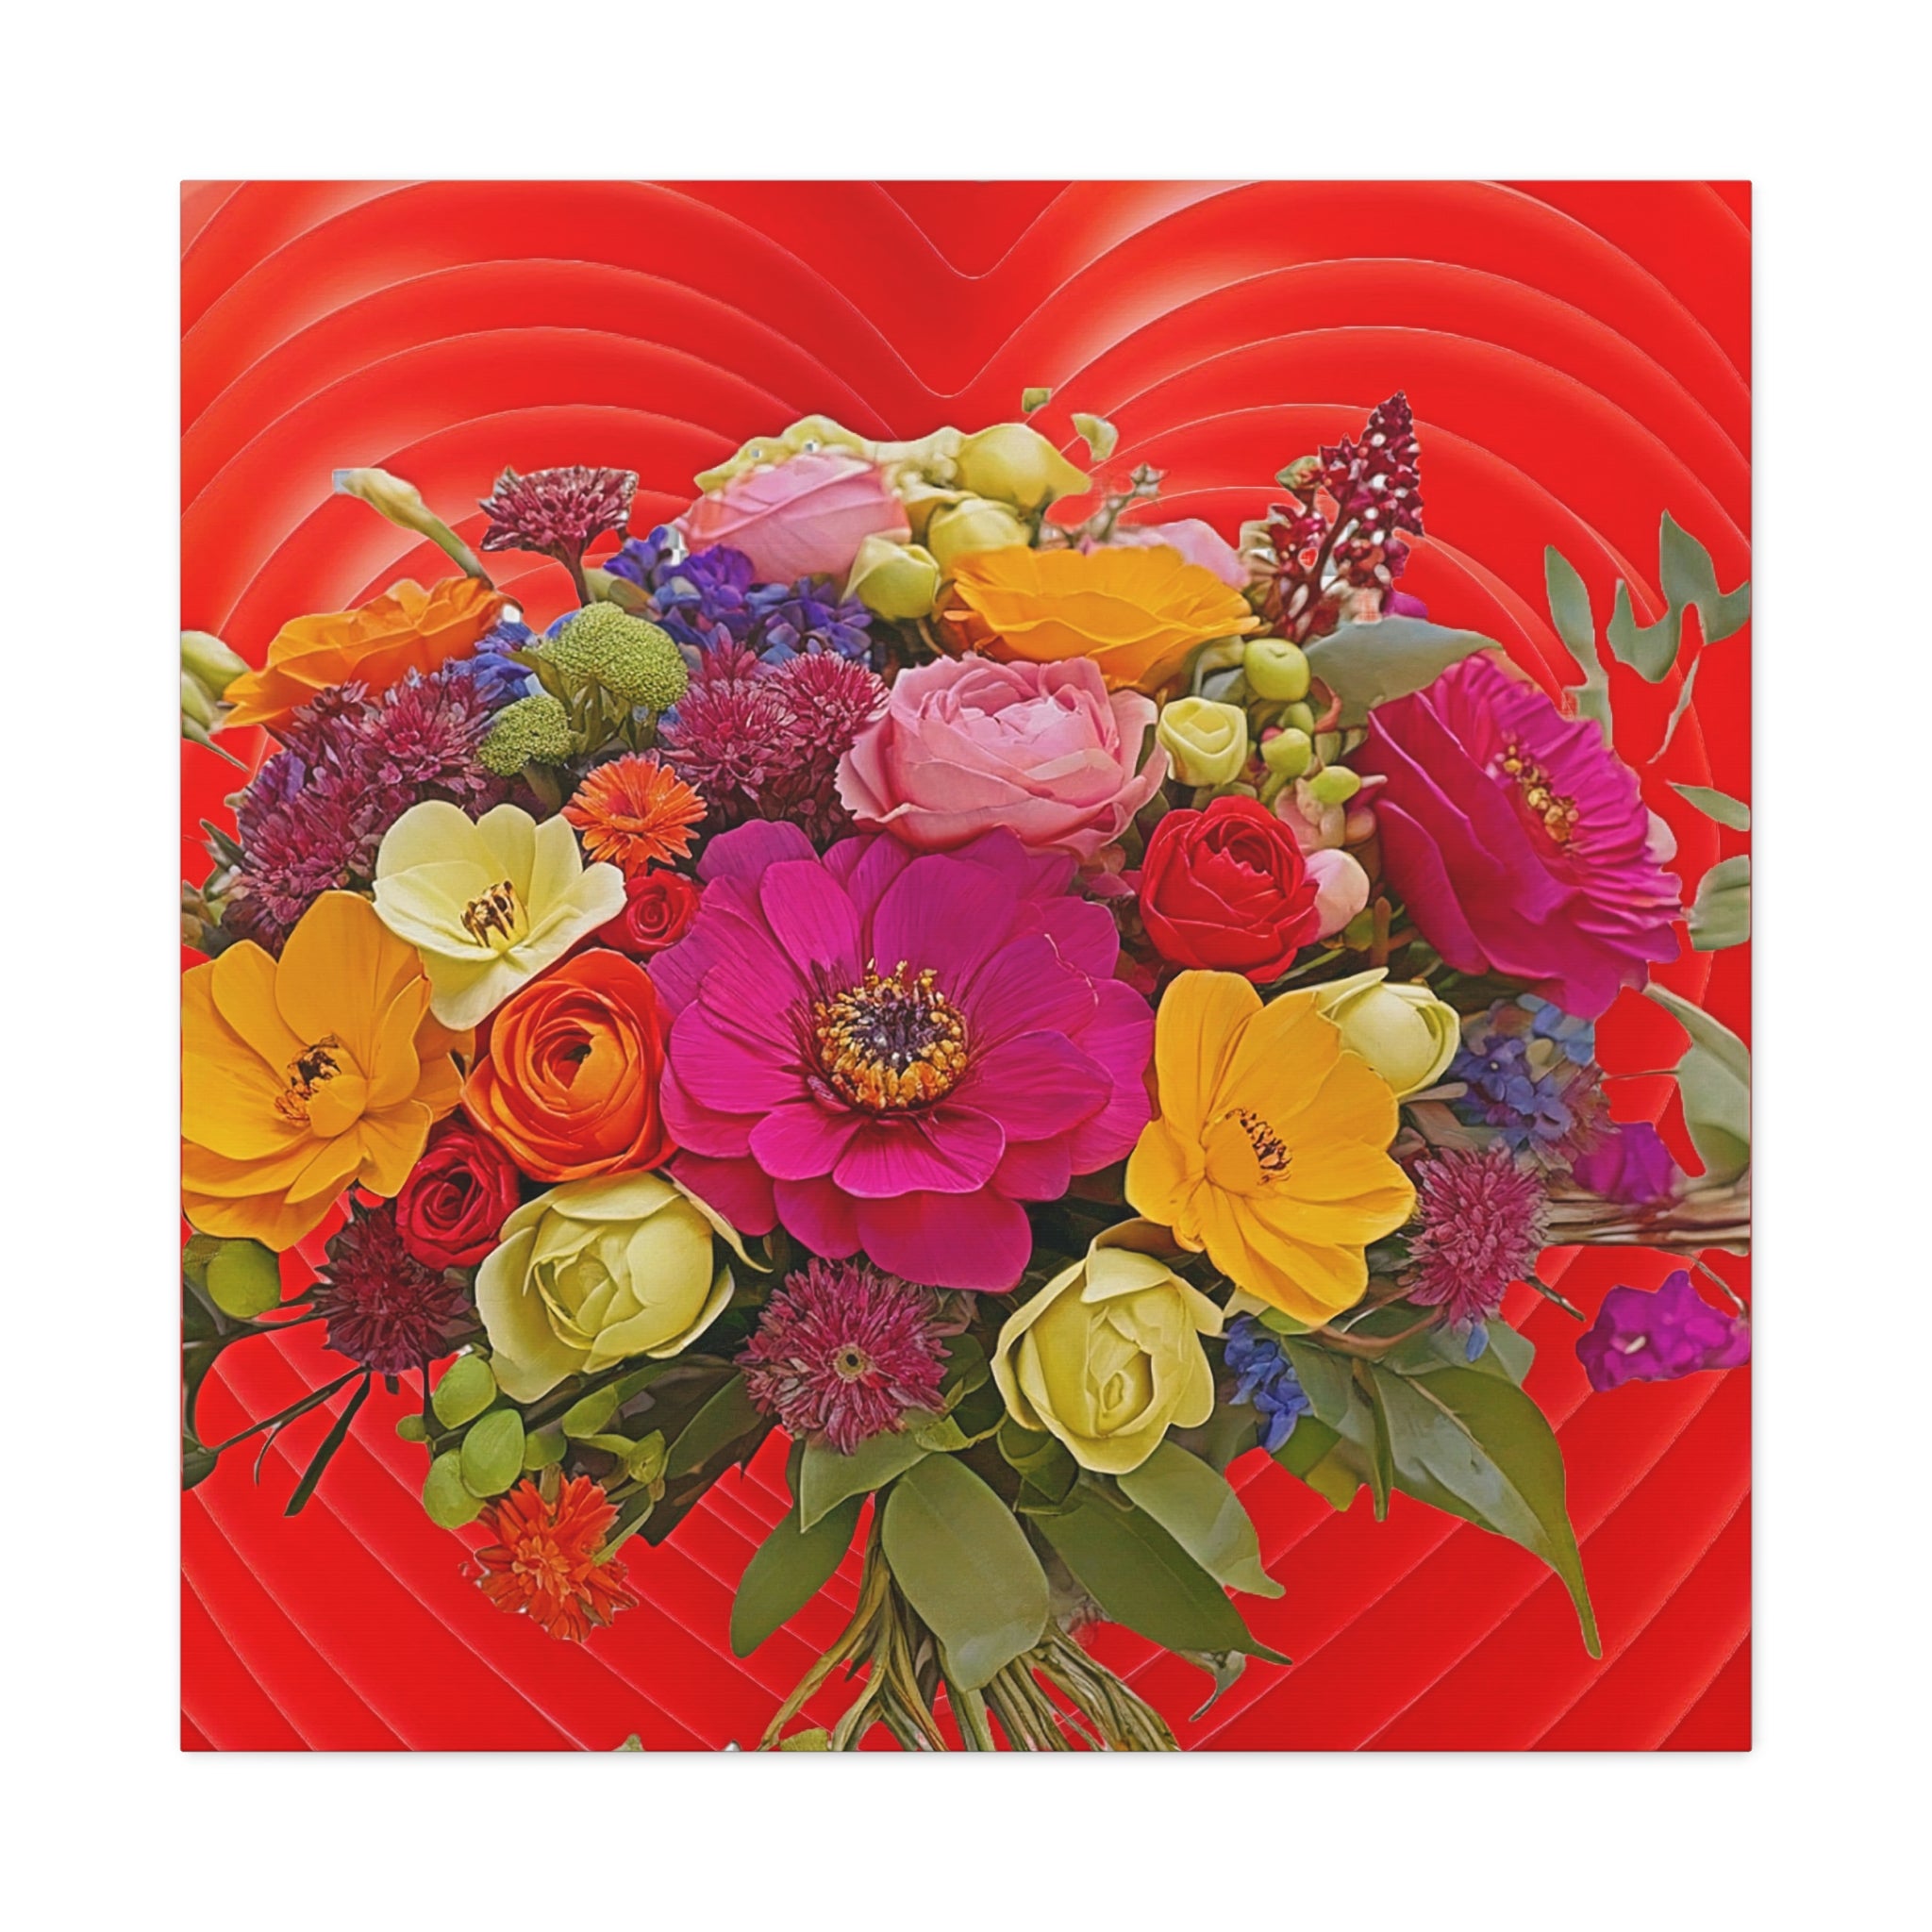 Wall Art LOVE FLOWERS Canvas Print Painting Original Giclee 32X32 GW Love Nice Beauty Fun Design Fit Hot House Home Office Gift Ready Hang Living